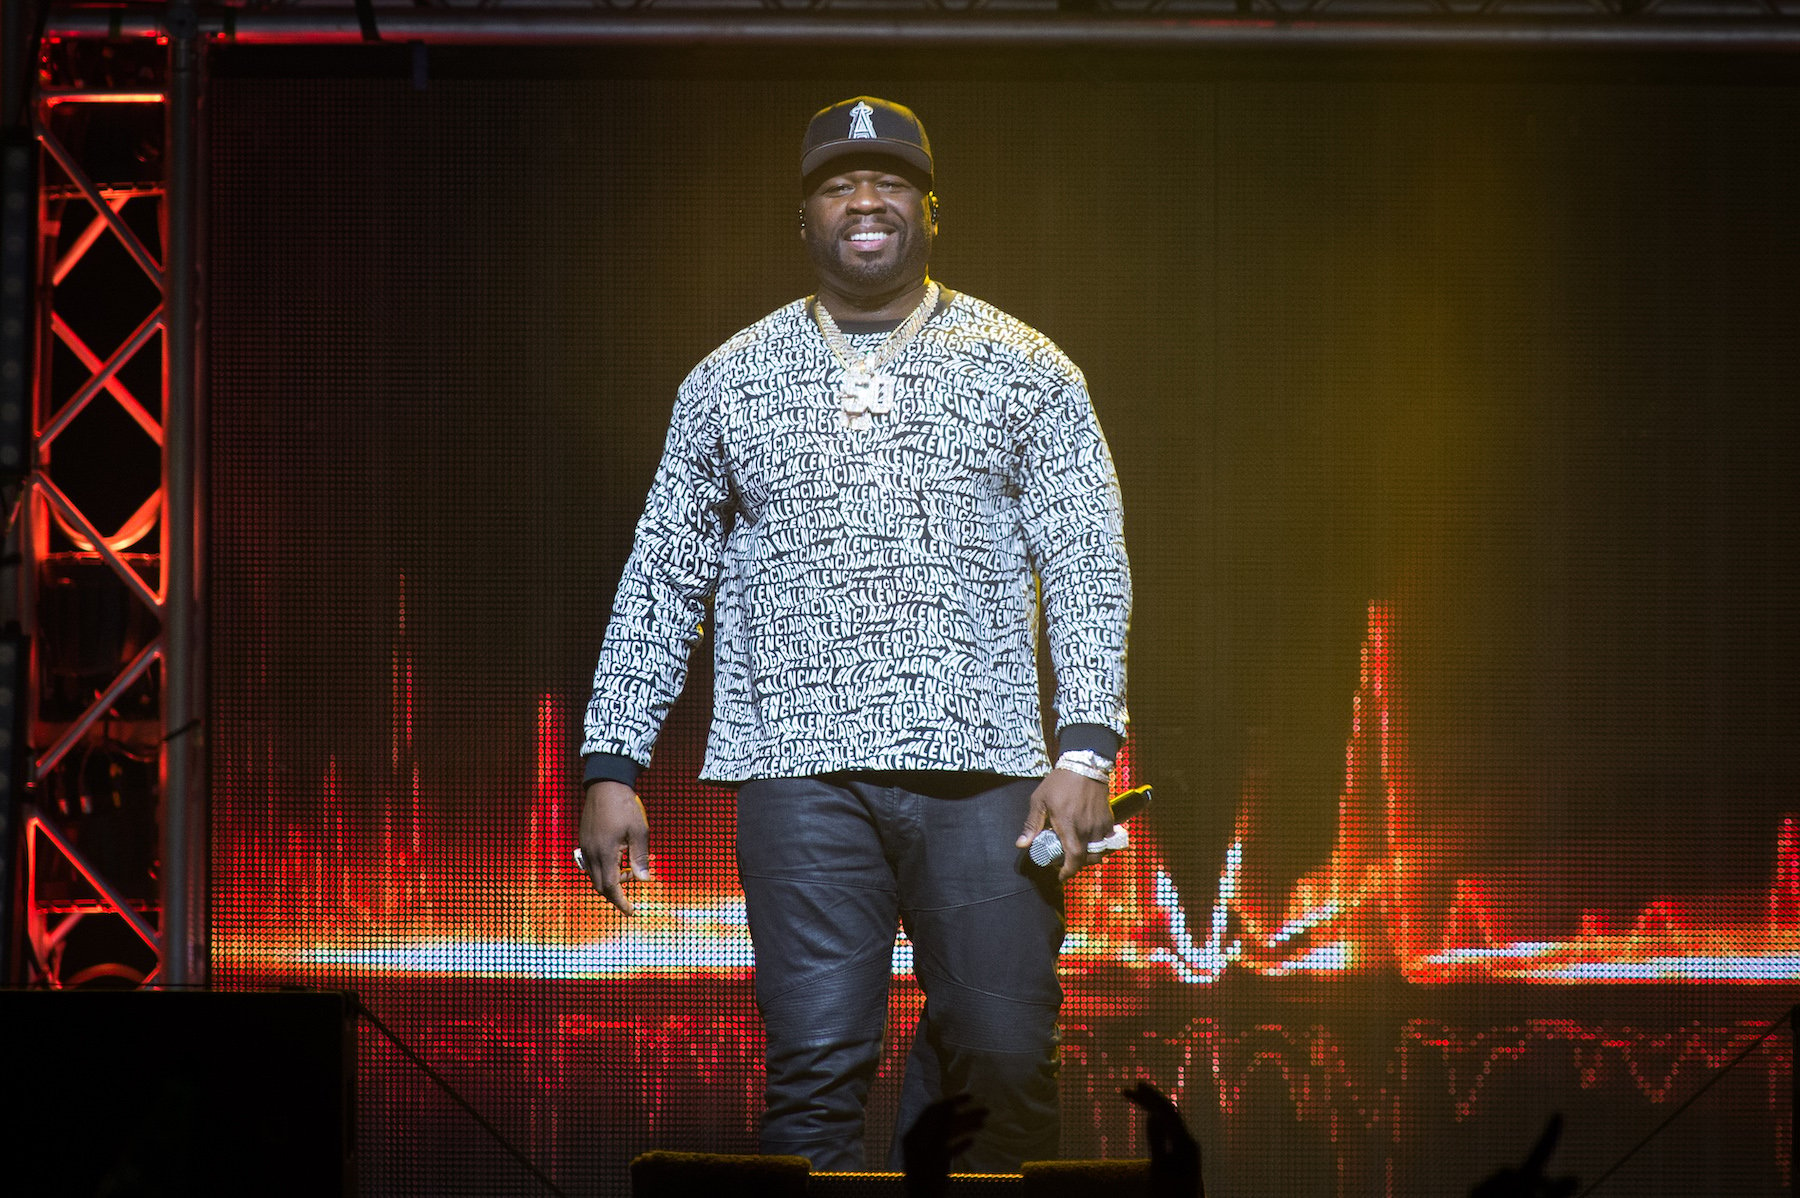 50 Cent, who has a partnership with the Houston Astros, on stage in a gray sweater